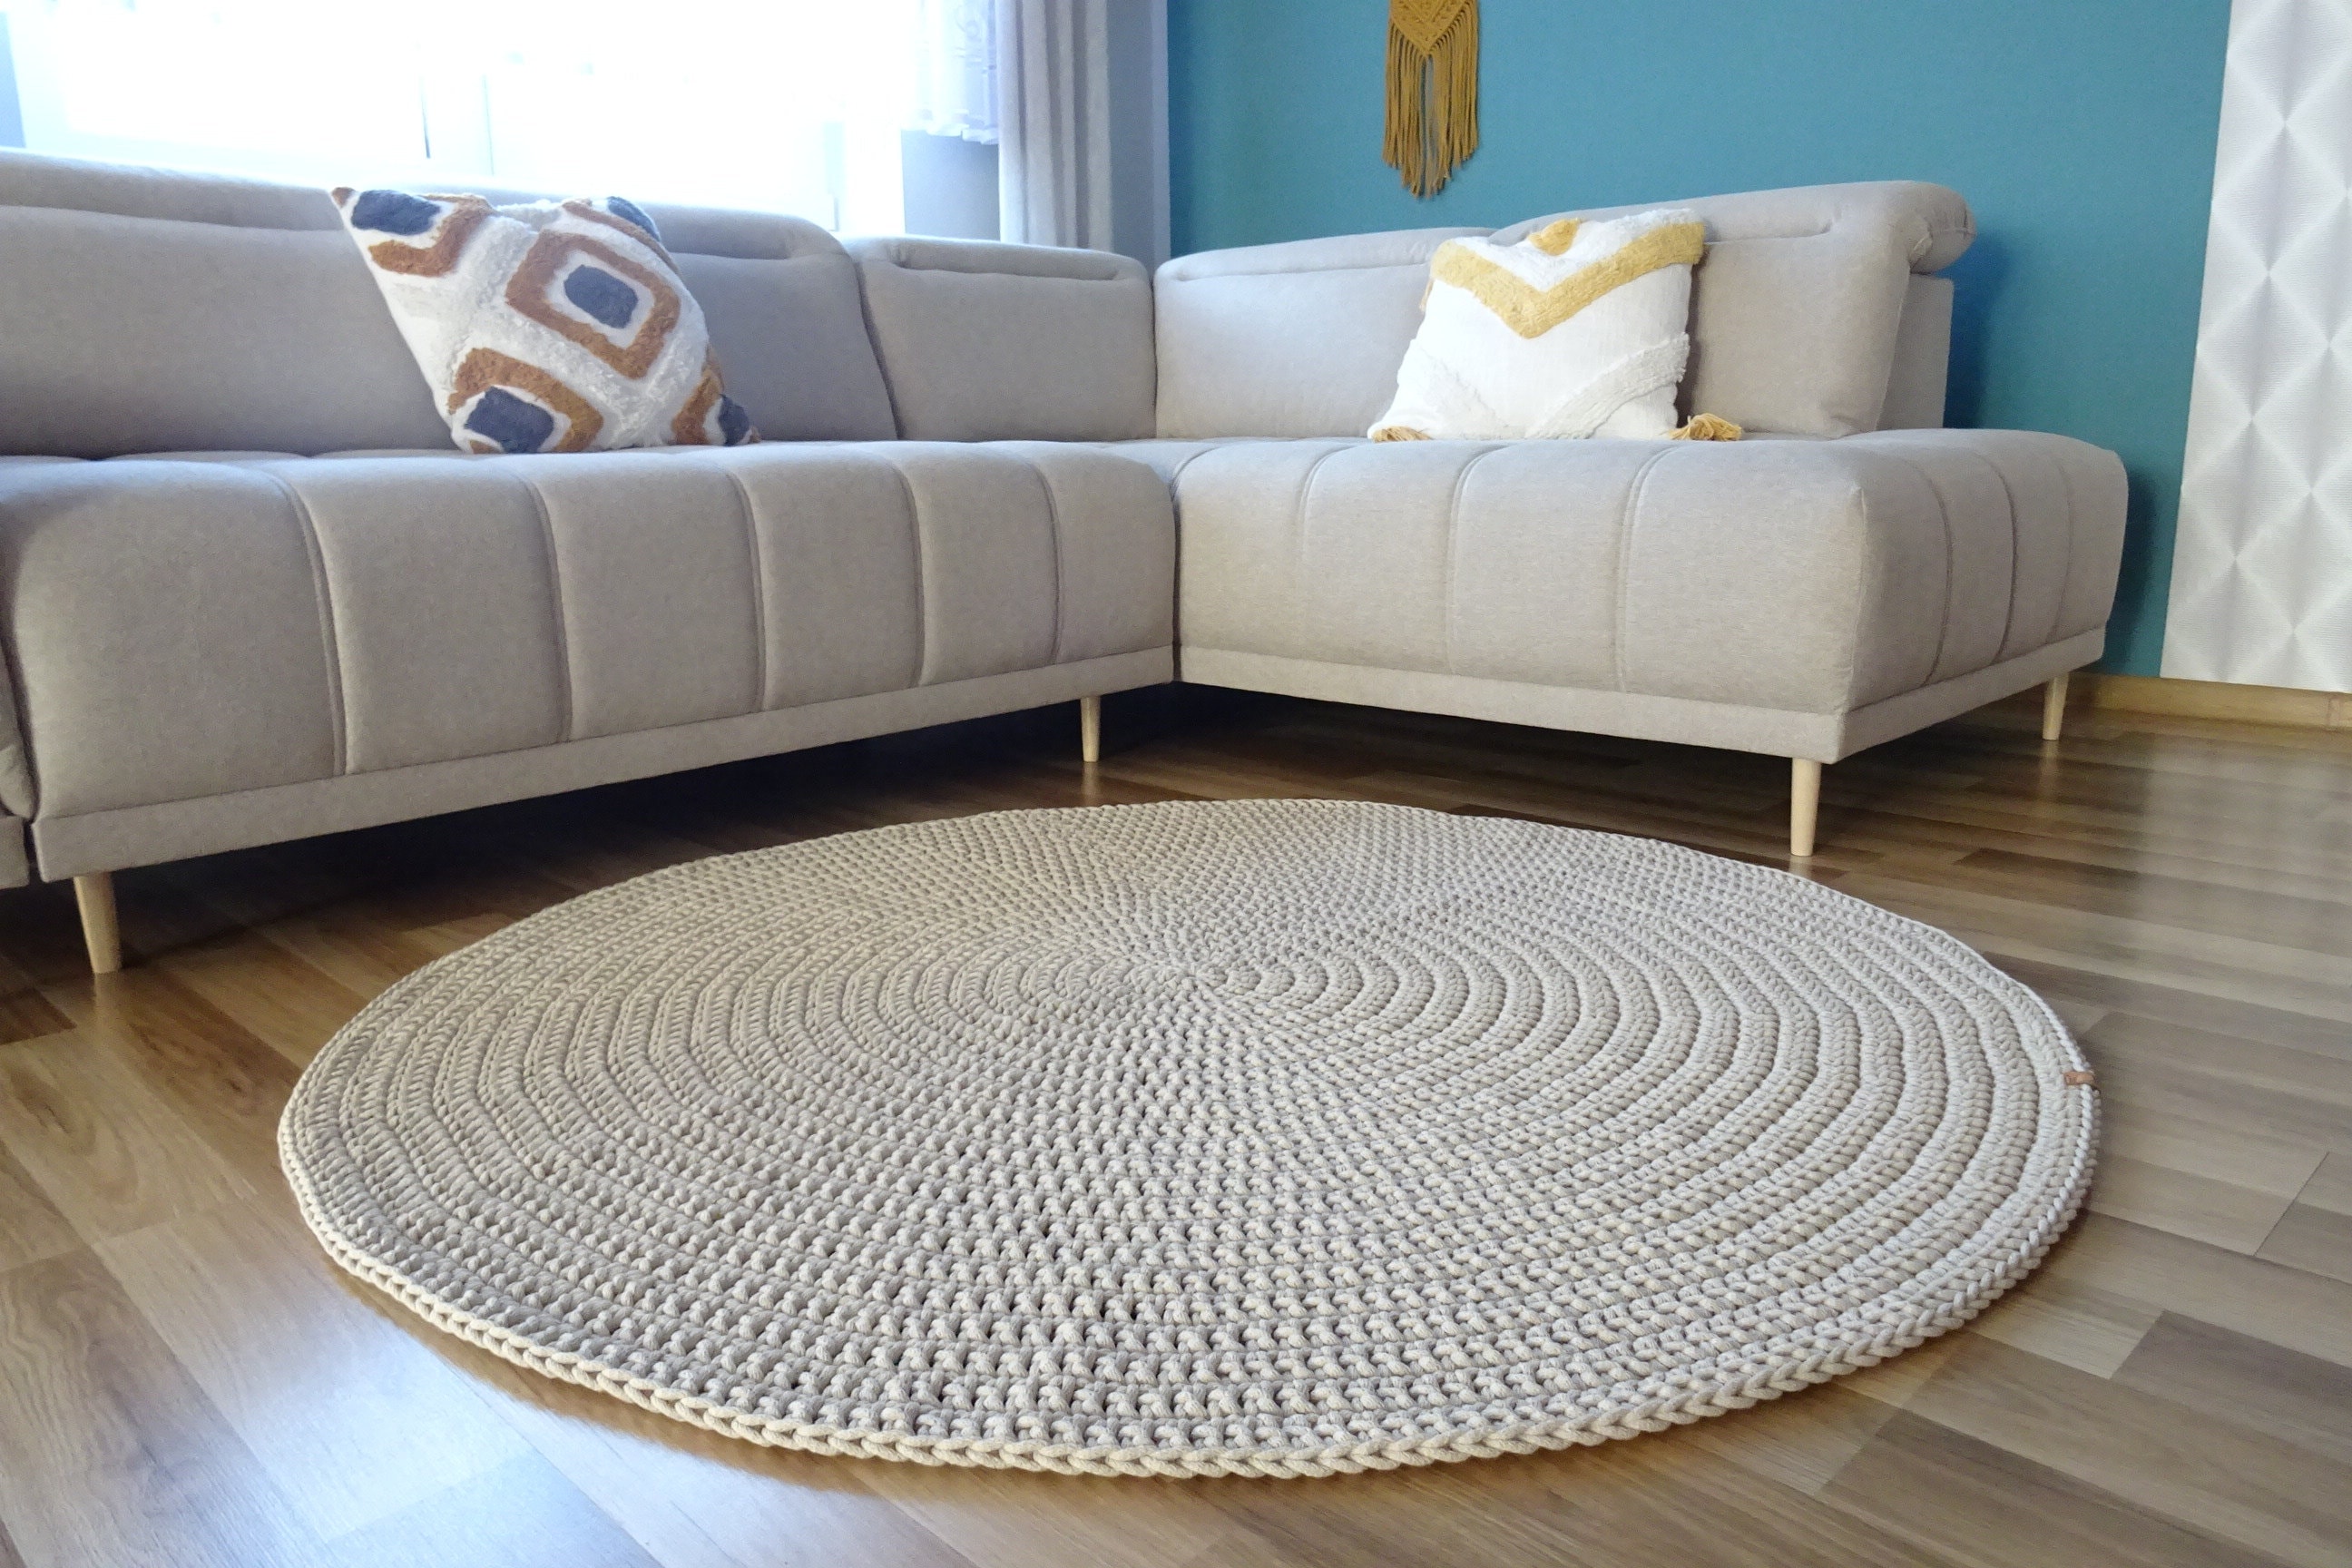 Beige Round Rug, Many Colors, Rugs for Living Room, Nursery Rug Boy, Large Round  Rug, Small Round Rug, Washable Rug, Playroom Rug, Carpet 